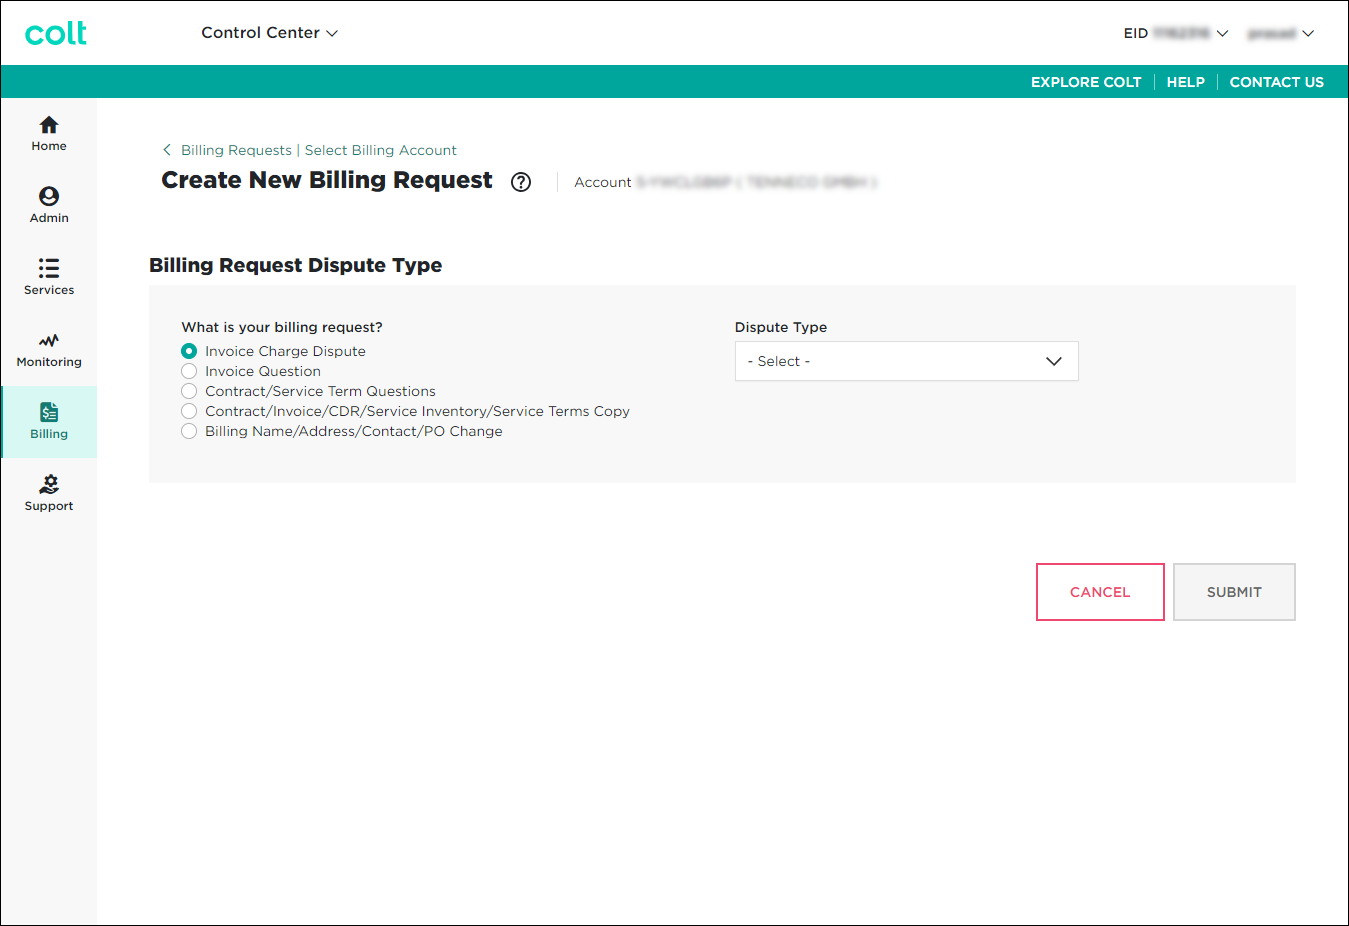 Create New Billing Request (showing billing request dispute types)